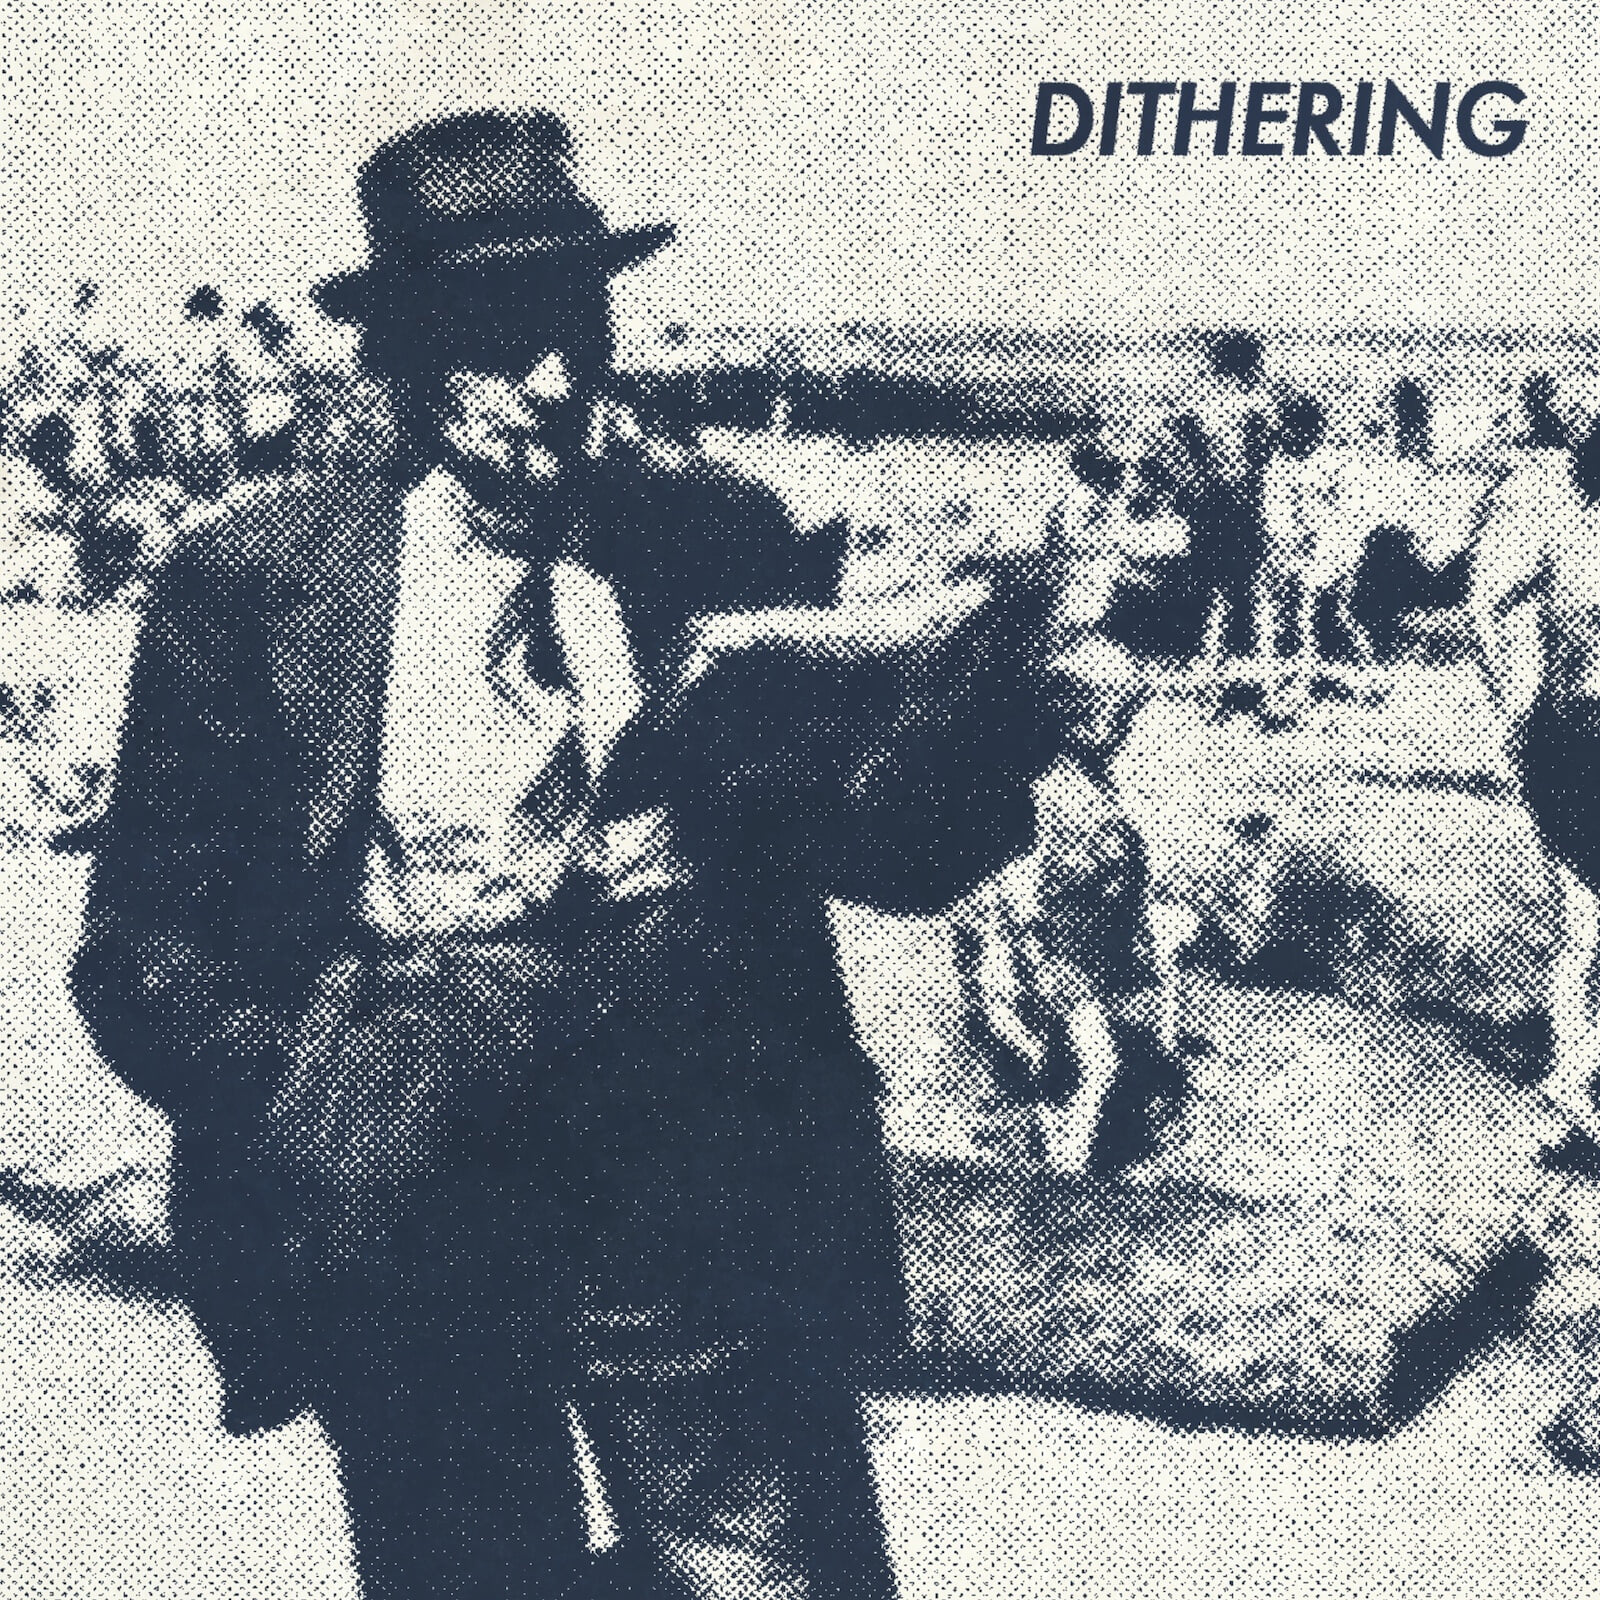 August 2022 cover art for Dithering, depicting a man, circa the mid-20th century, wearing a suit and fedora reading the newspaper while surrounded by frolickers at the beach.